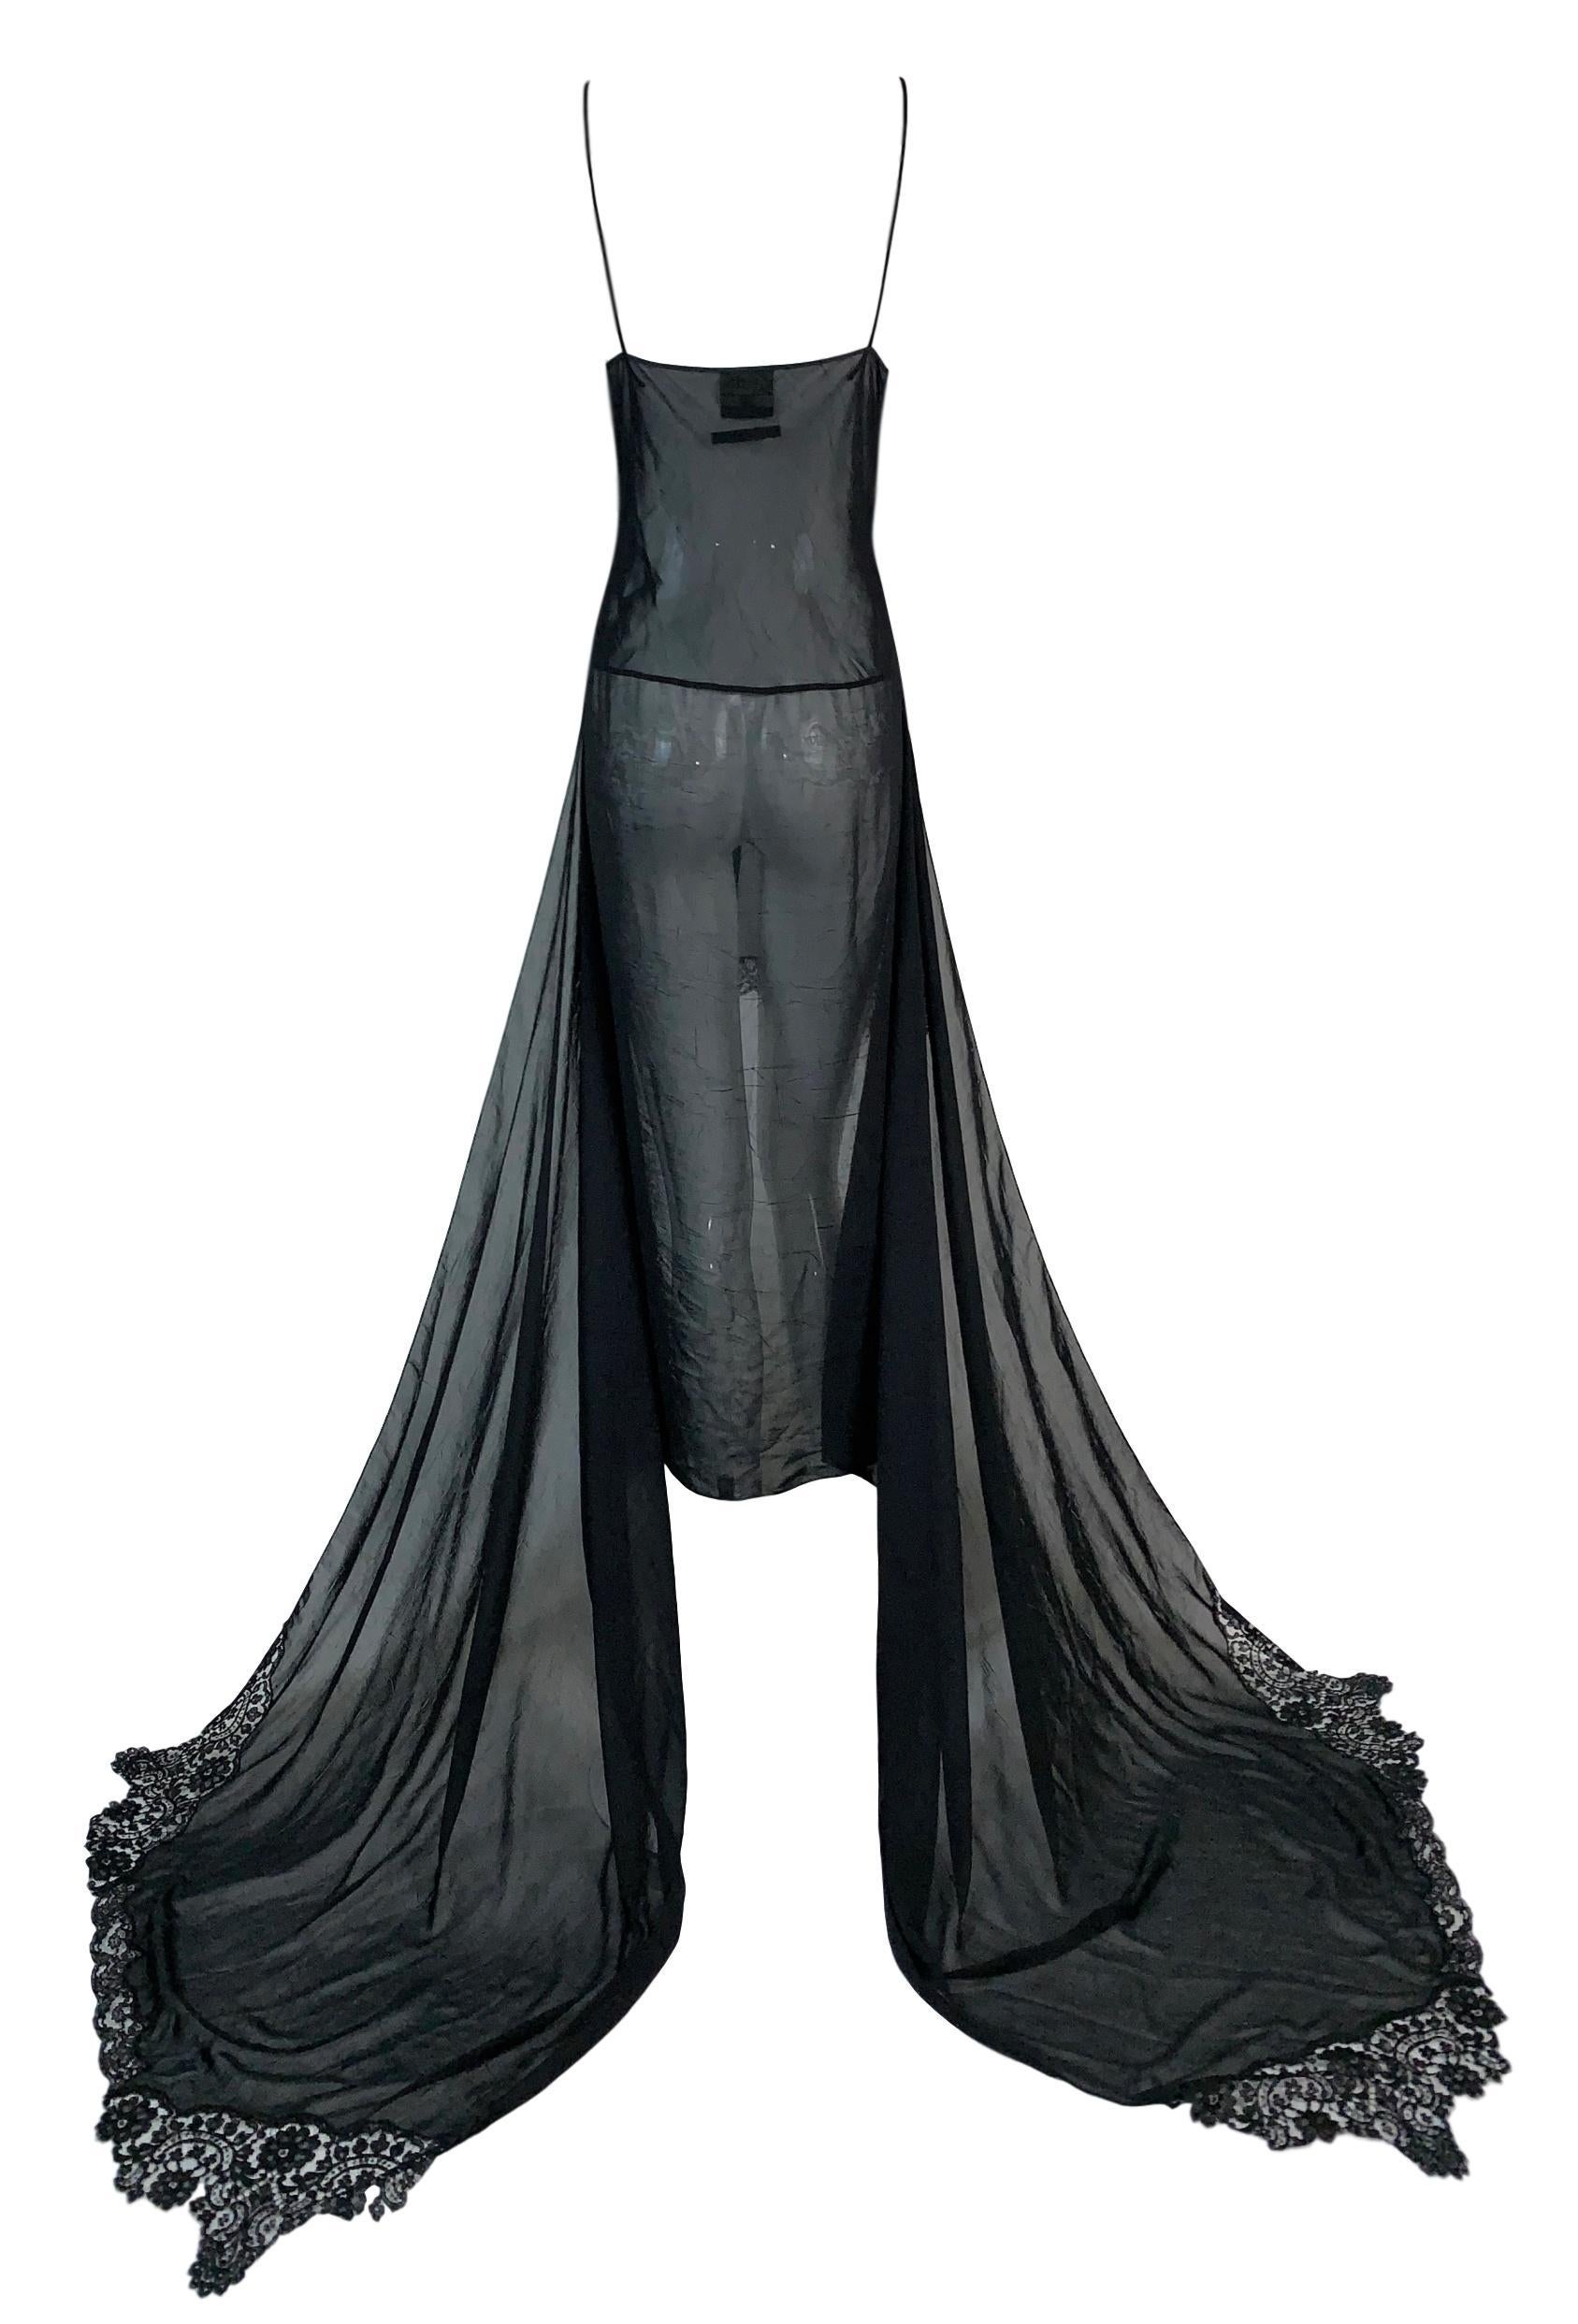 S/S 2001 Jean Paul Gaultier Sheer Black Lace Trim Hi-Low Gown Mini Dress In Excellent Condition In Yukon, OK